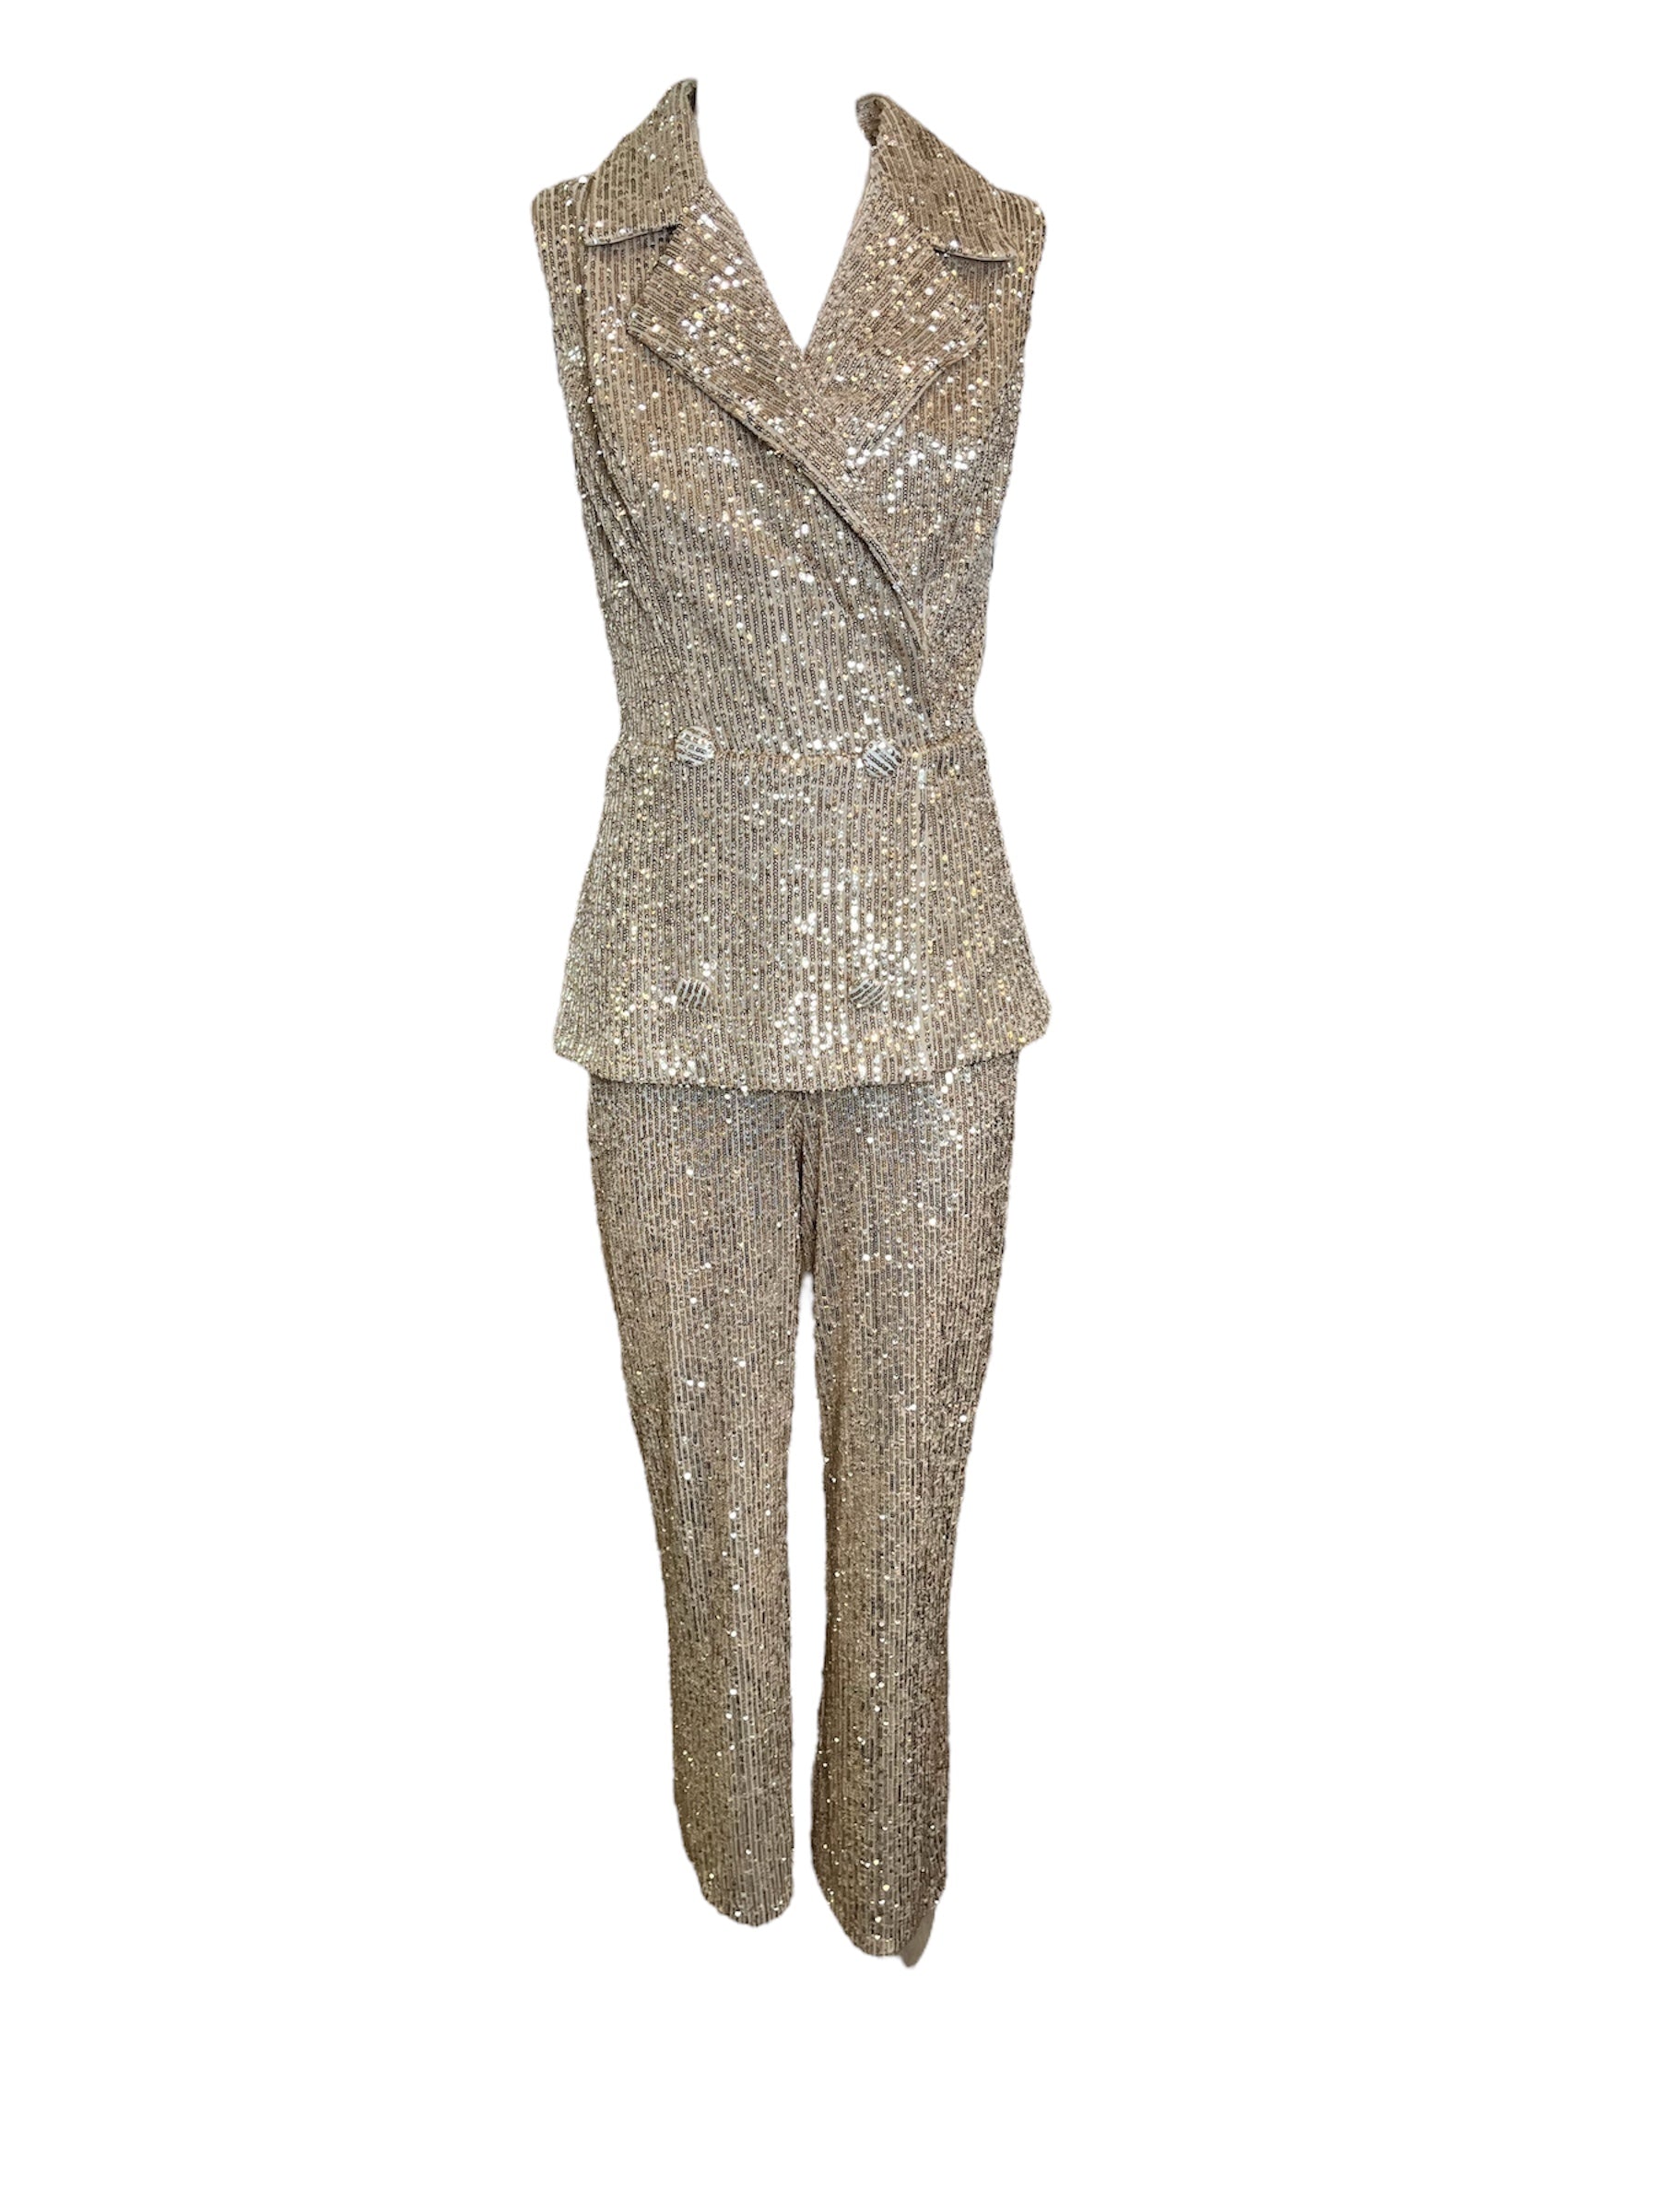 Romeo Gigli Gold Sequin Jumpsuit FRONT PHOTO 1 OF 5